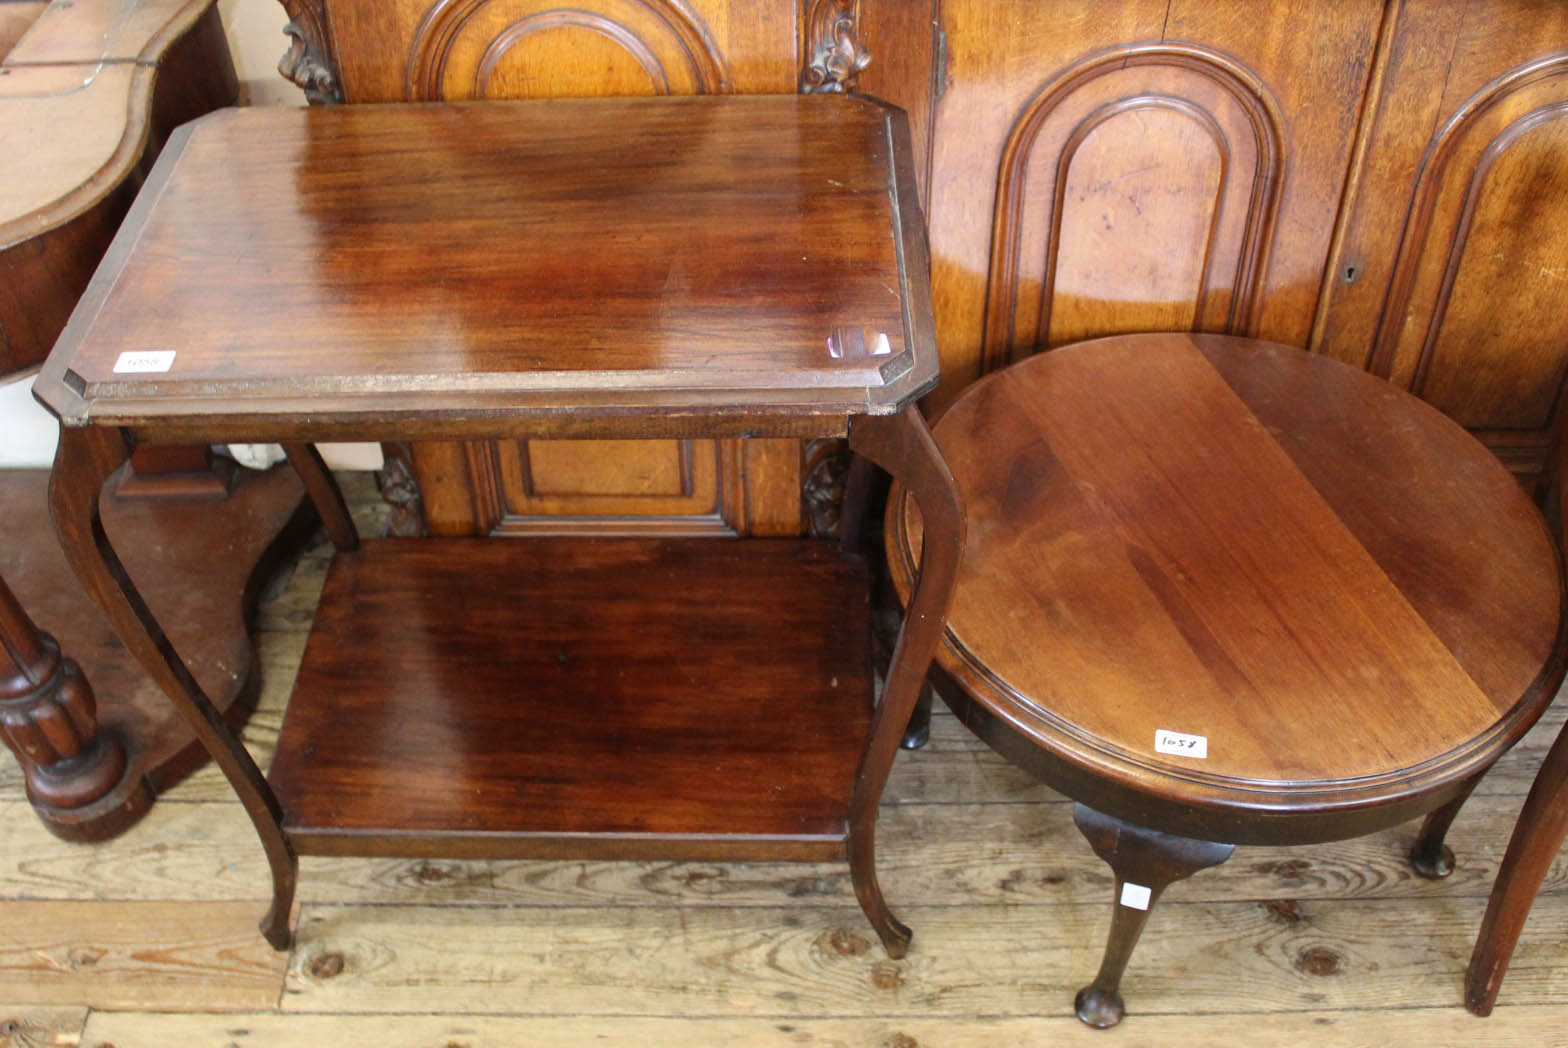 An Edwardian mahogany low round table and another Edwardian mahogany table